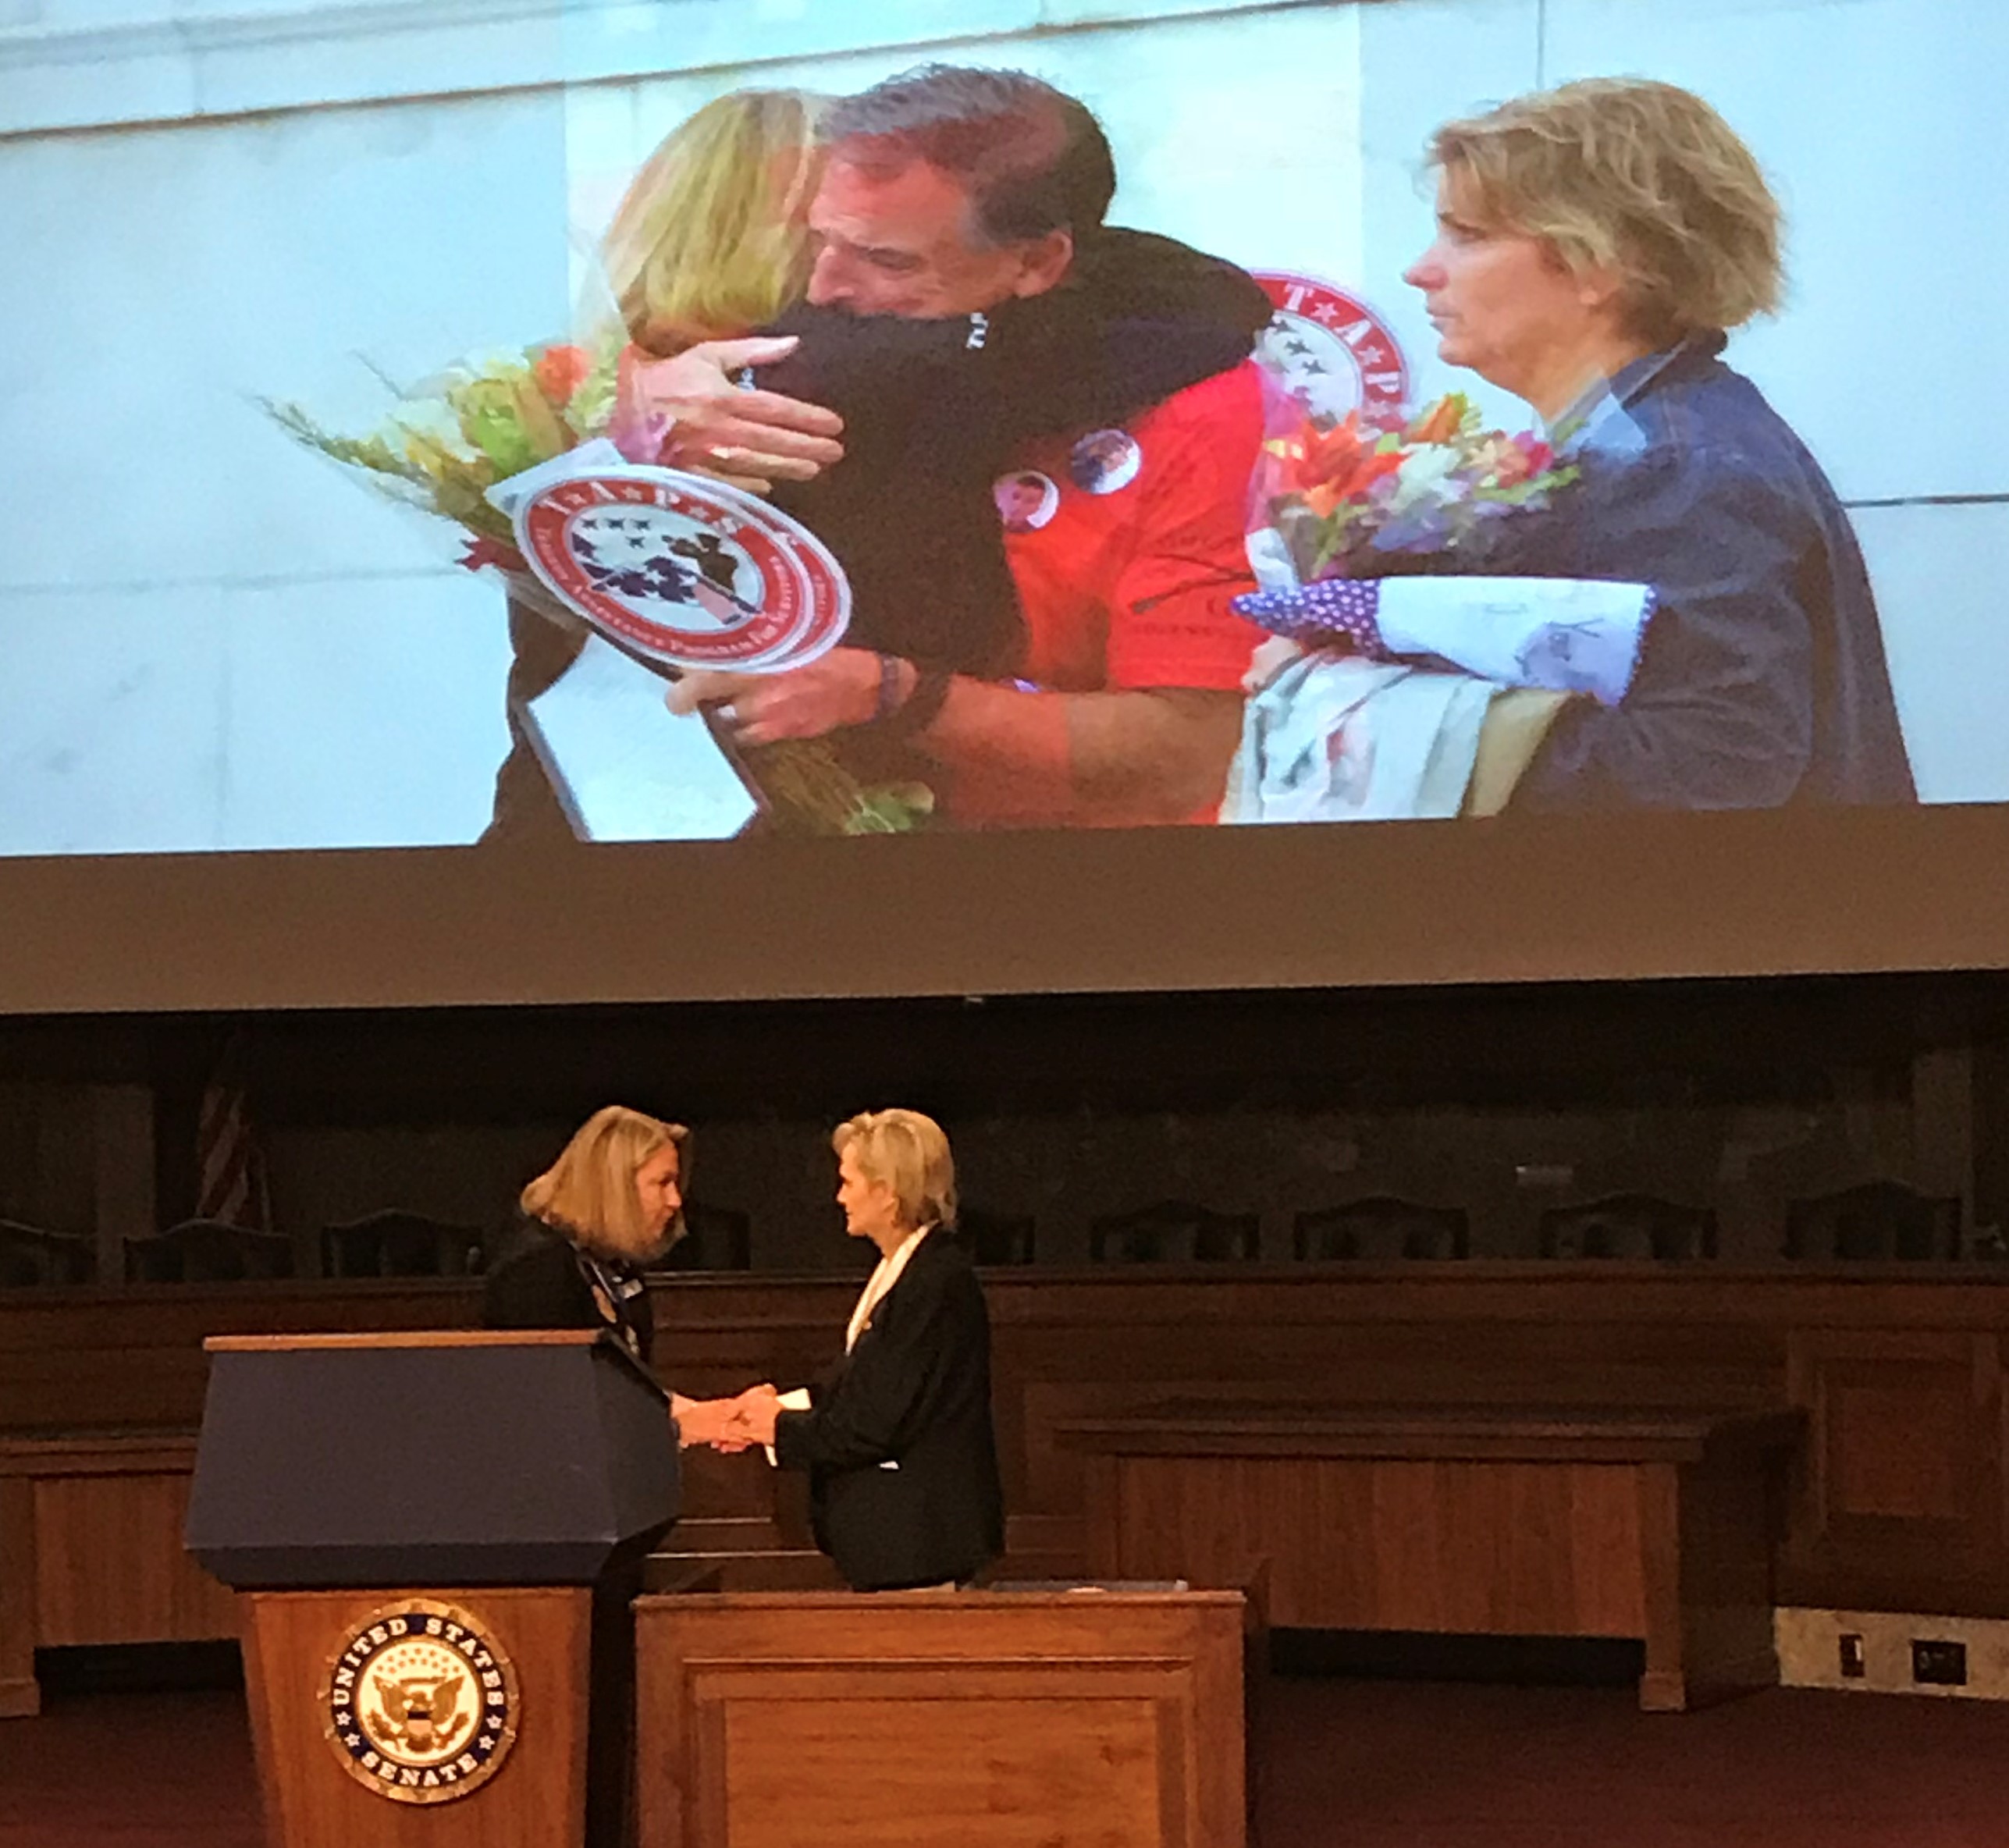 Senator Hyde-Smith commemorates Gold Star Families Remembrance Week with families gathered by the Tragedy Assistance Program for Survivors (TAPS) organization